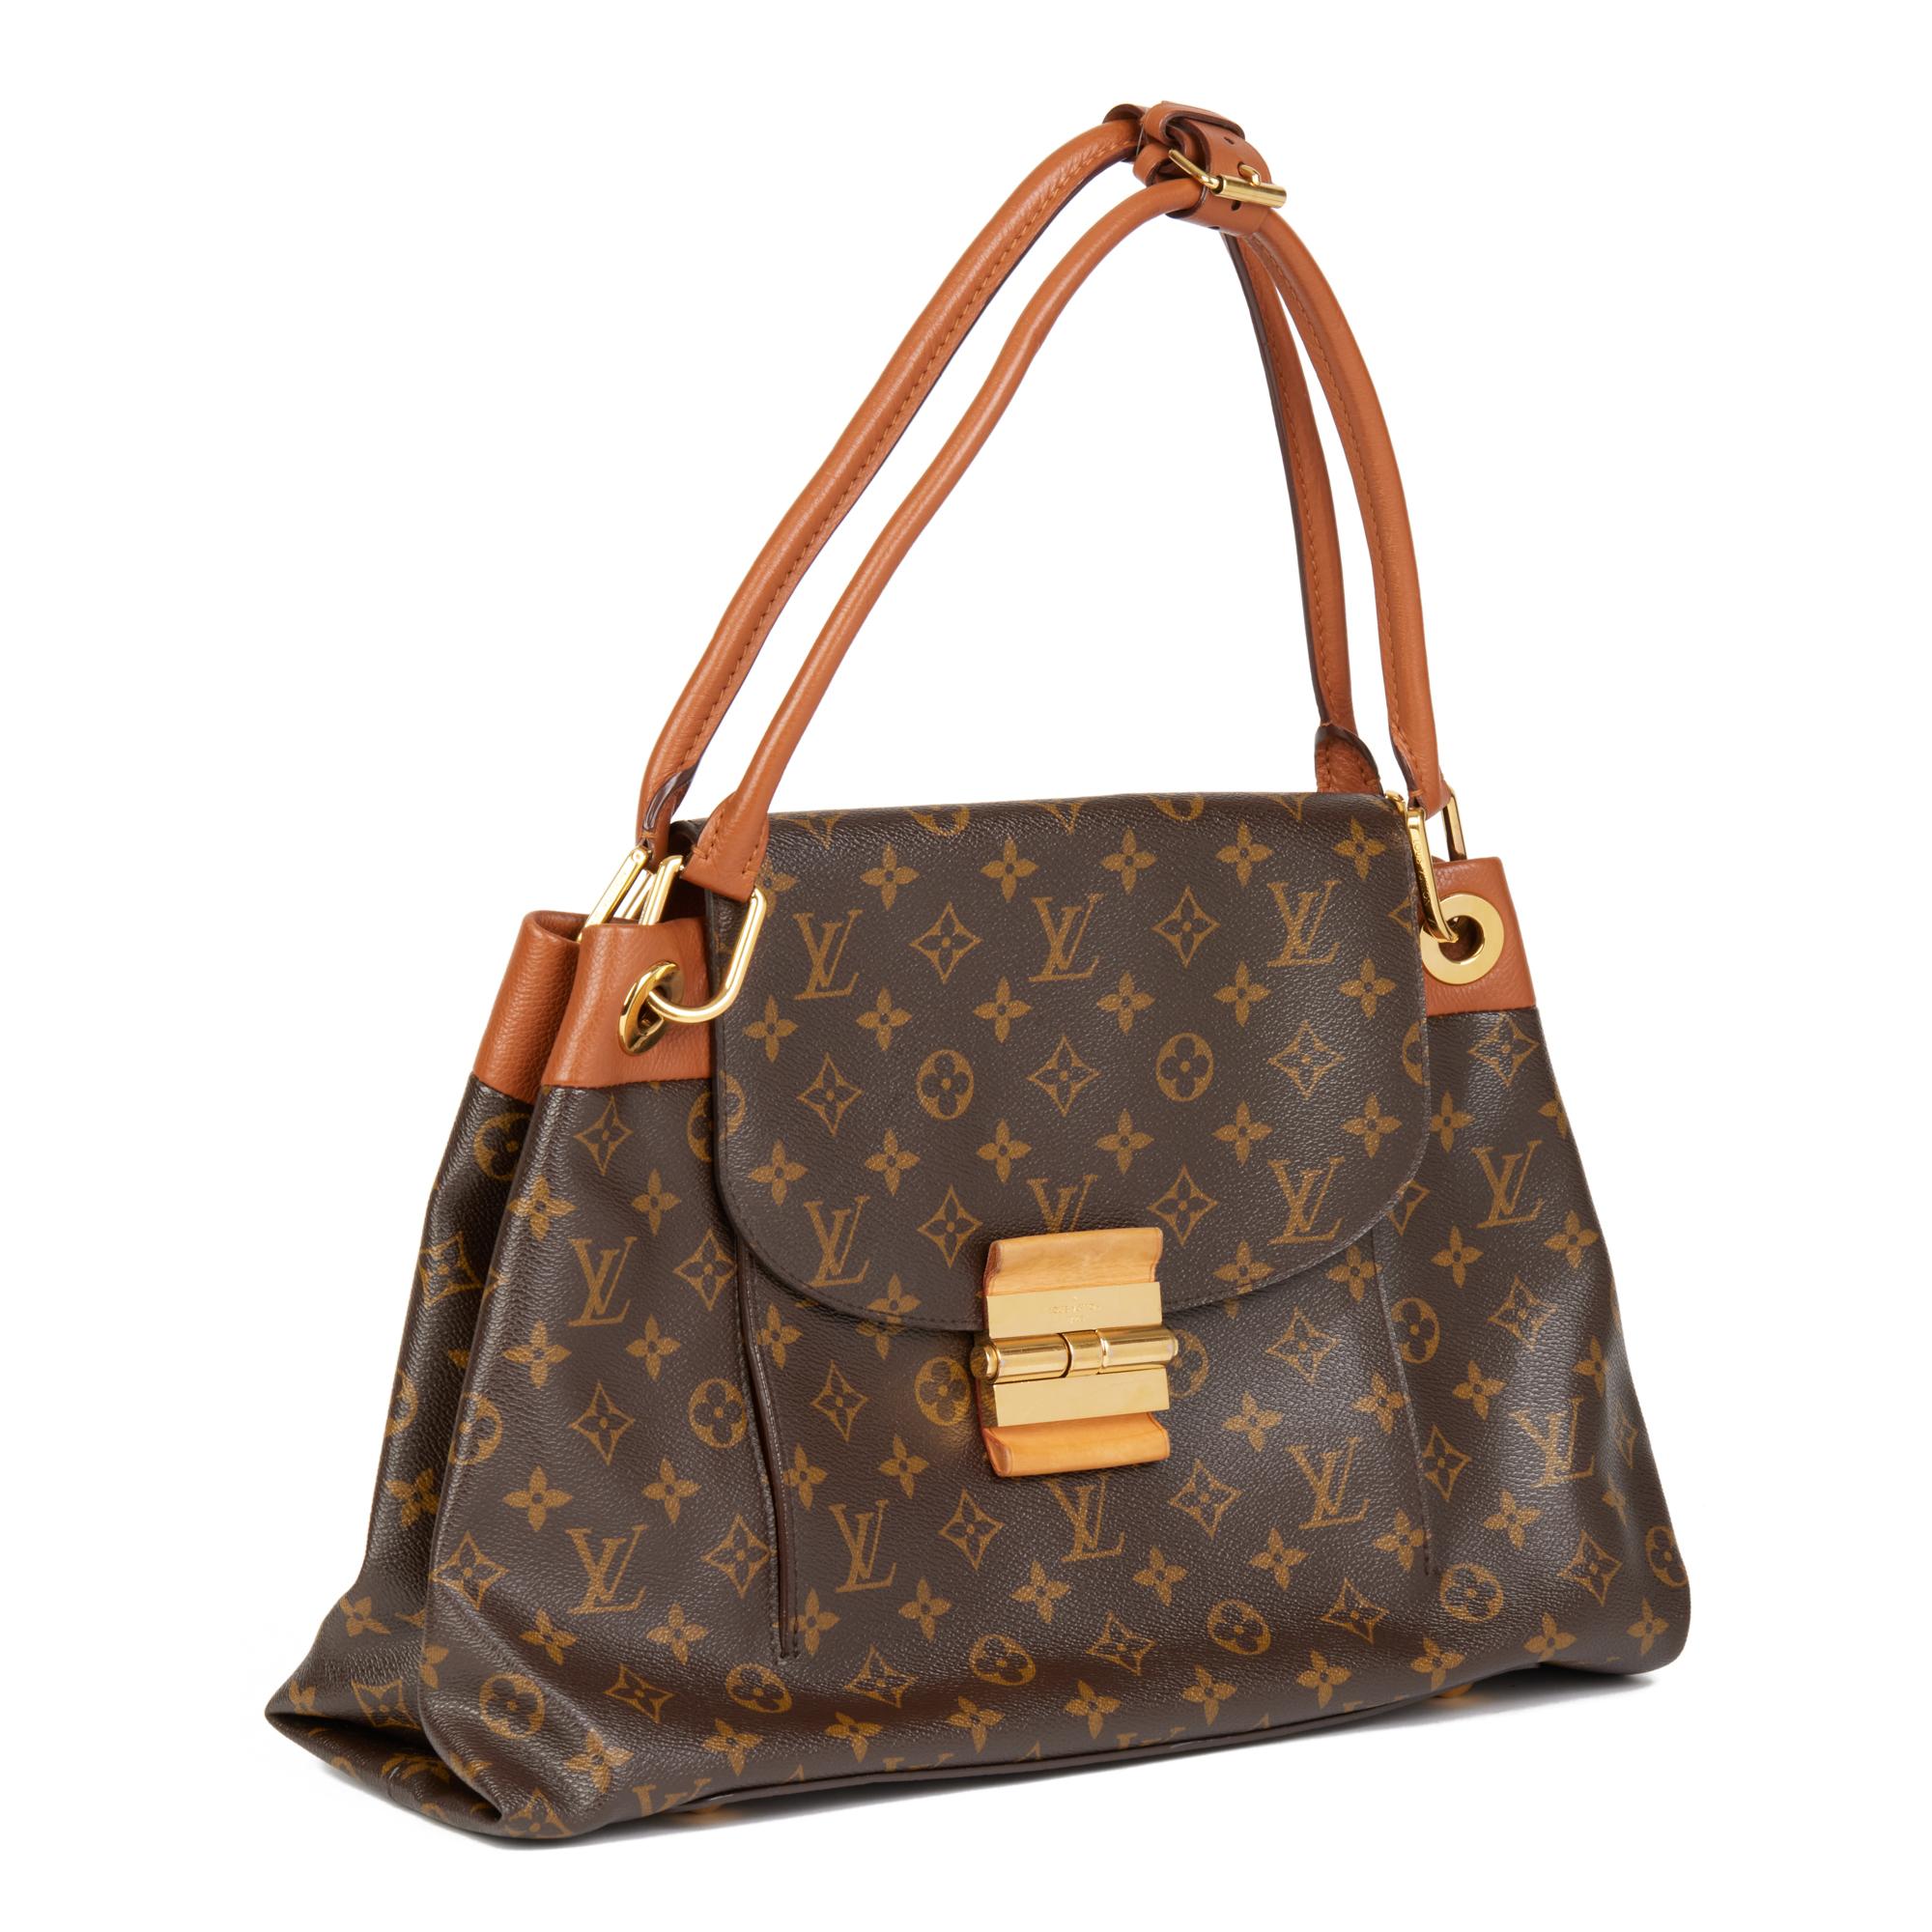 LOUIS VUITTON
Brown Monogram Coated Canvas & Camel Calfskin Leather Olympe

Serial Number: SP3102
Age (Circa): 2012
Accompanied By: Louis Vuitton Dust Bag
Authenticity Details: Date Stamp (Made in France)
Gender: Ladies
Type: Shoulder, Tote

Colour: